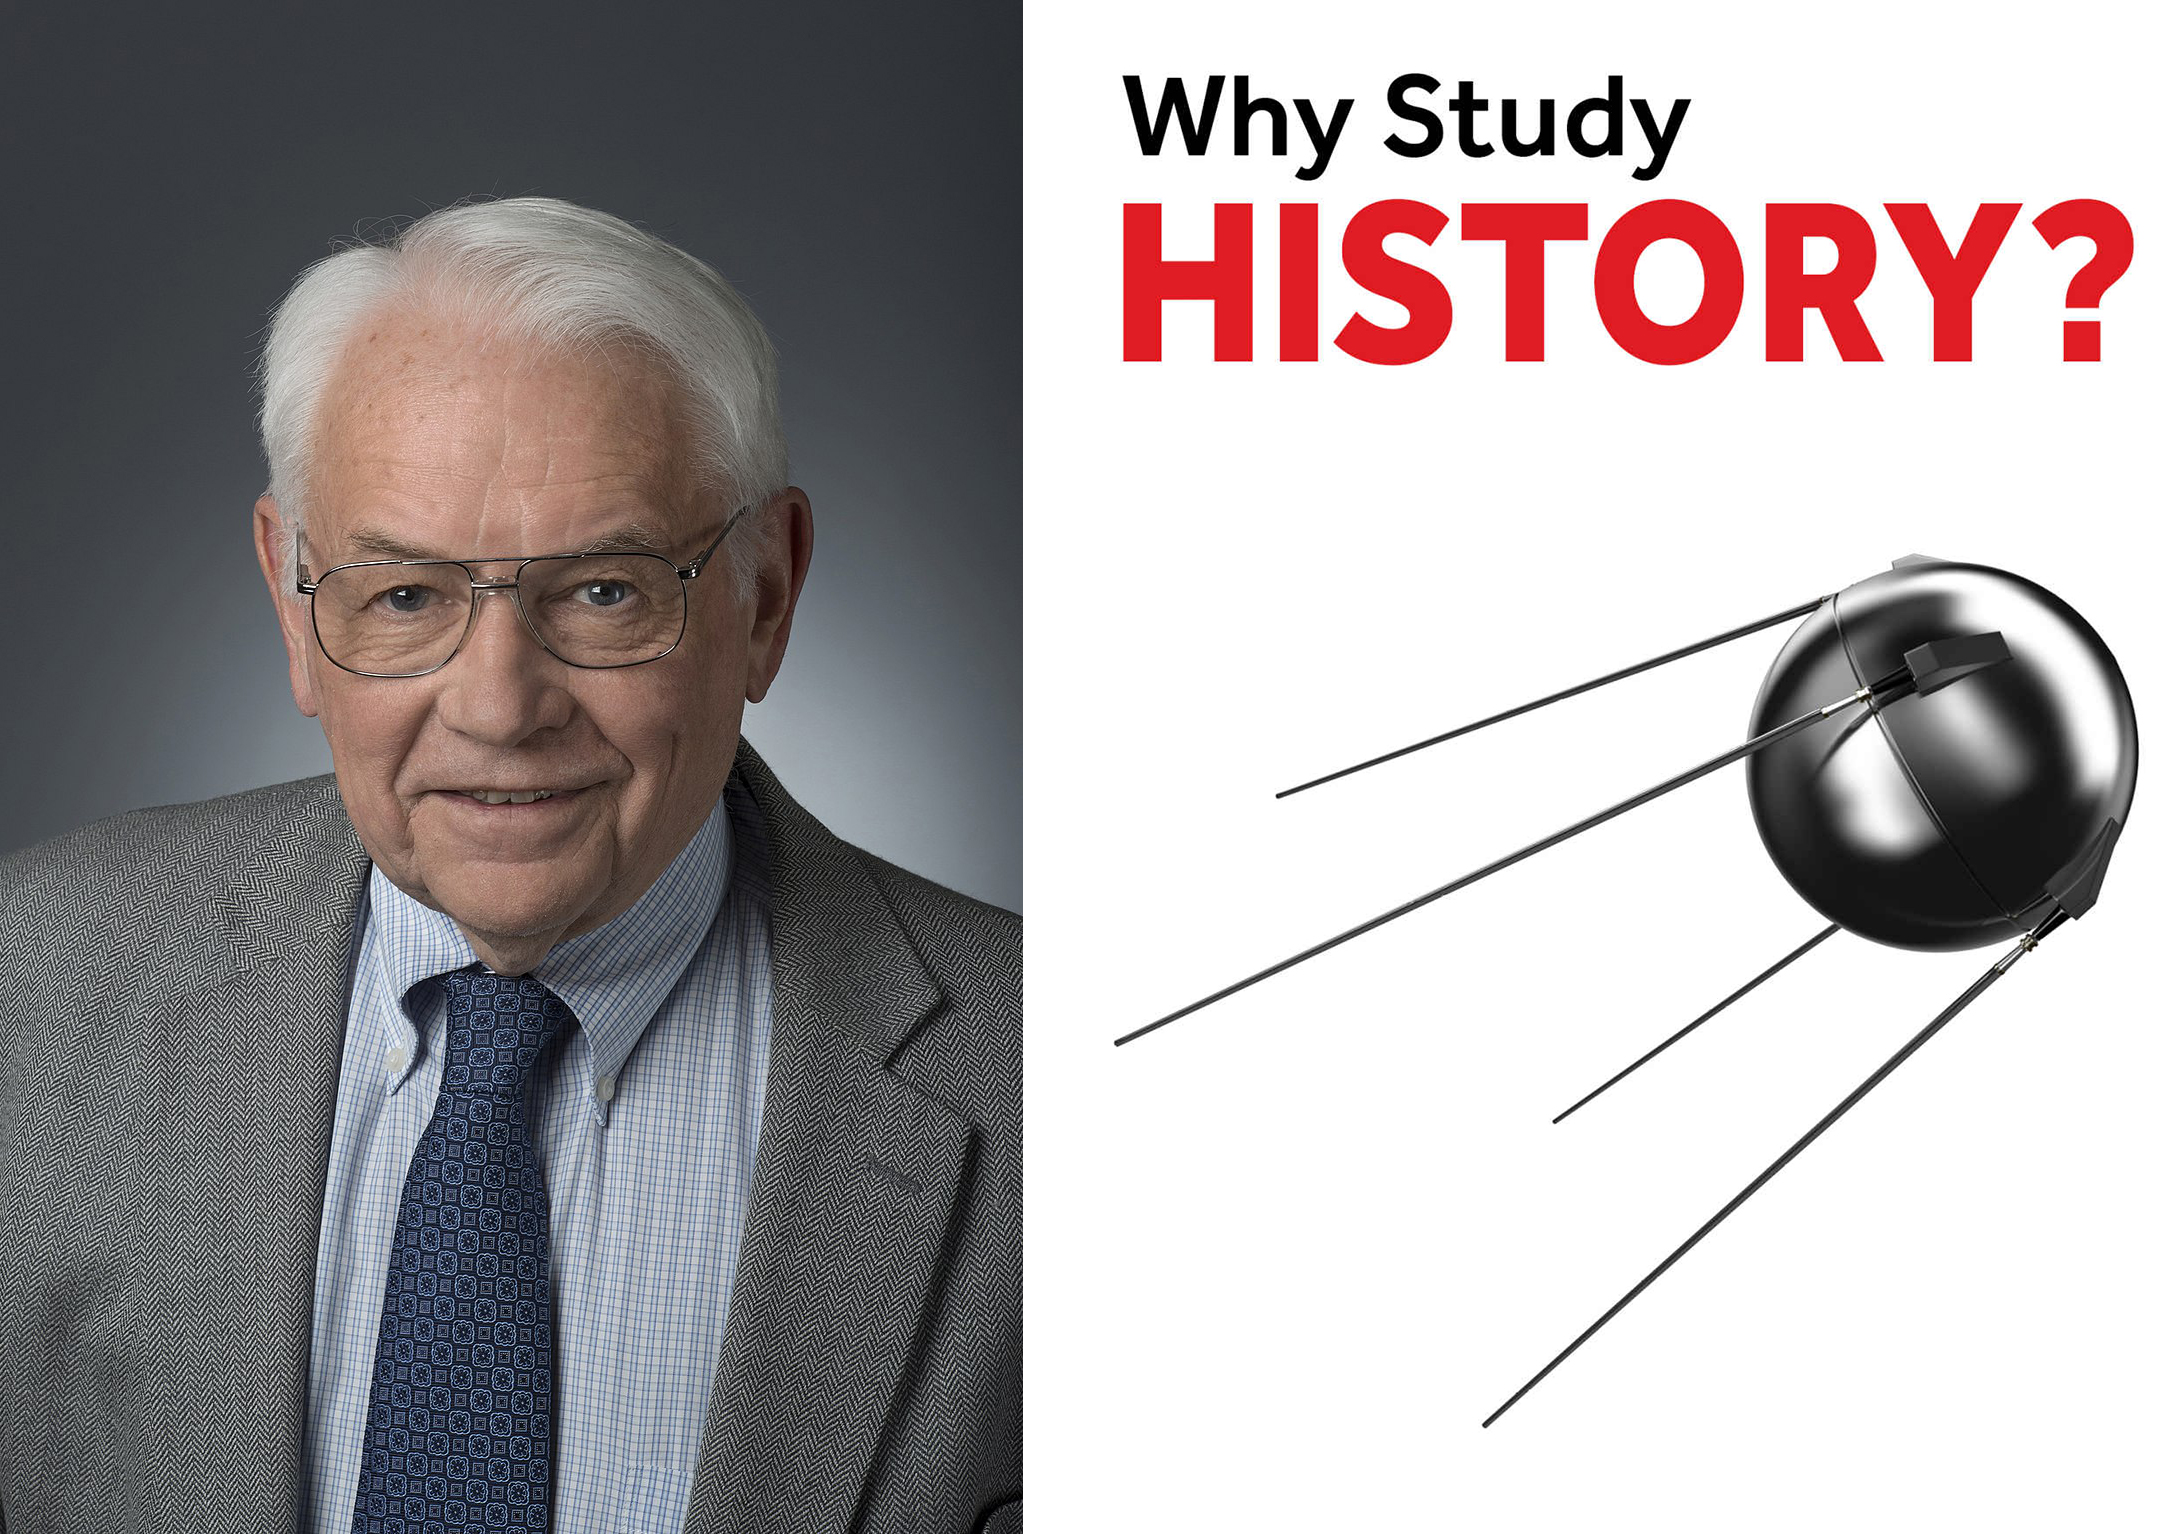 George Mason University professor and author Peter N. Stearns on the left and the cover of his book why study history on the right